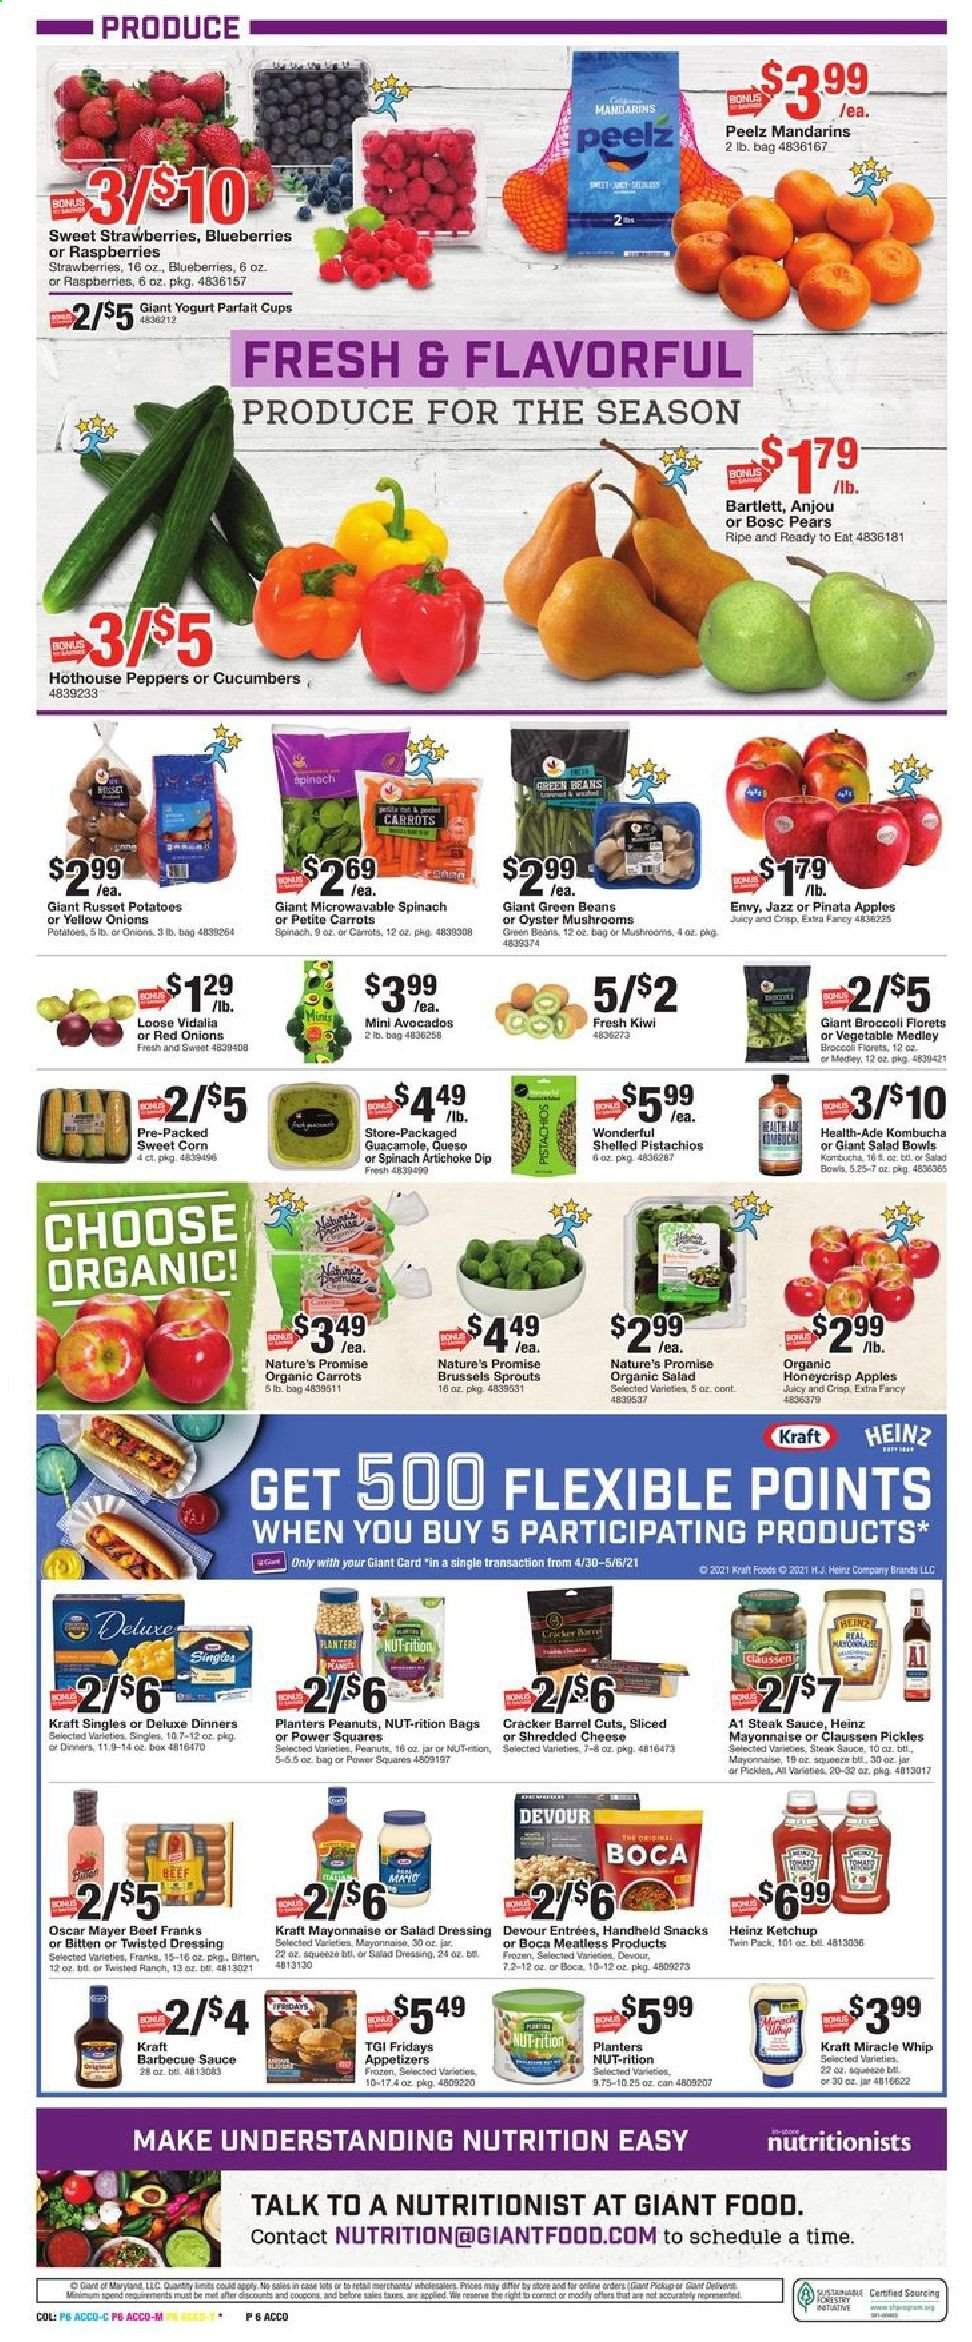 thumbnail - Giant Food Flyer - 04/30/2021 - 05/06/2021 - Sales products - oyster mushrooms, mushrooms, Nature’s Promise, broccoli, carrots, corn, cucumber, green beans, red onions, russet potatoes, potatoes, onion, peppers, brussel sprouts, sweet corn, apples, blueberries, kiwi, mandarines, raspberries, strawberries, pears, oysters, Kraft®, Oscar Mayer, guacamole, sandwich slices, shredded cheese, Kraft Singles, yoghurt, Miracle Whip, dip, Devour, snack, crackers, Heinz, pickles, BBQ sauce, salad dressing, steak sauce, ketchup, dressing, peanuts, pistachios, Planters, kombucha, steak, cup, salad bowl. Page 6.